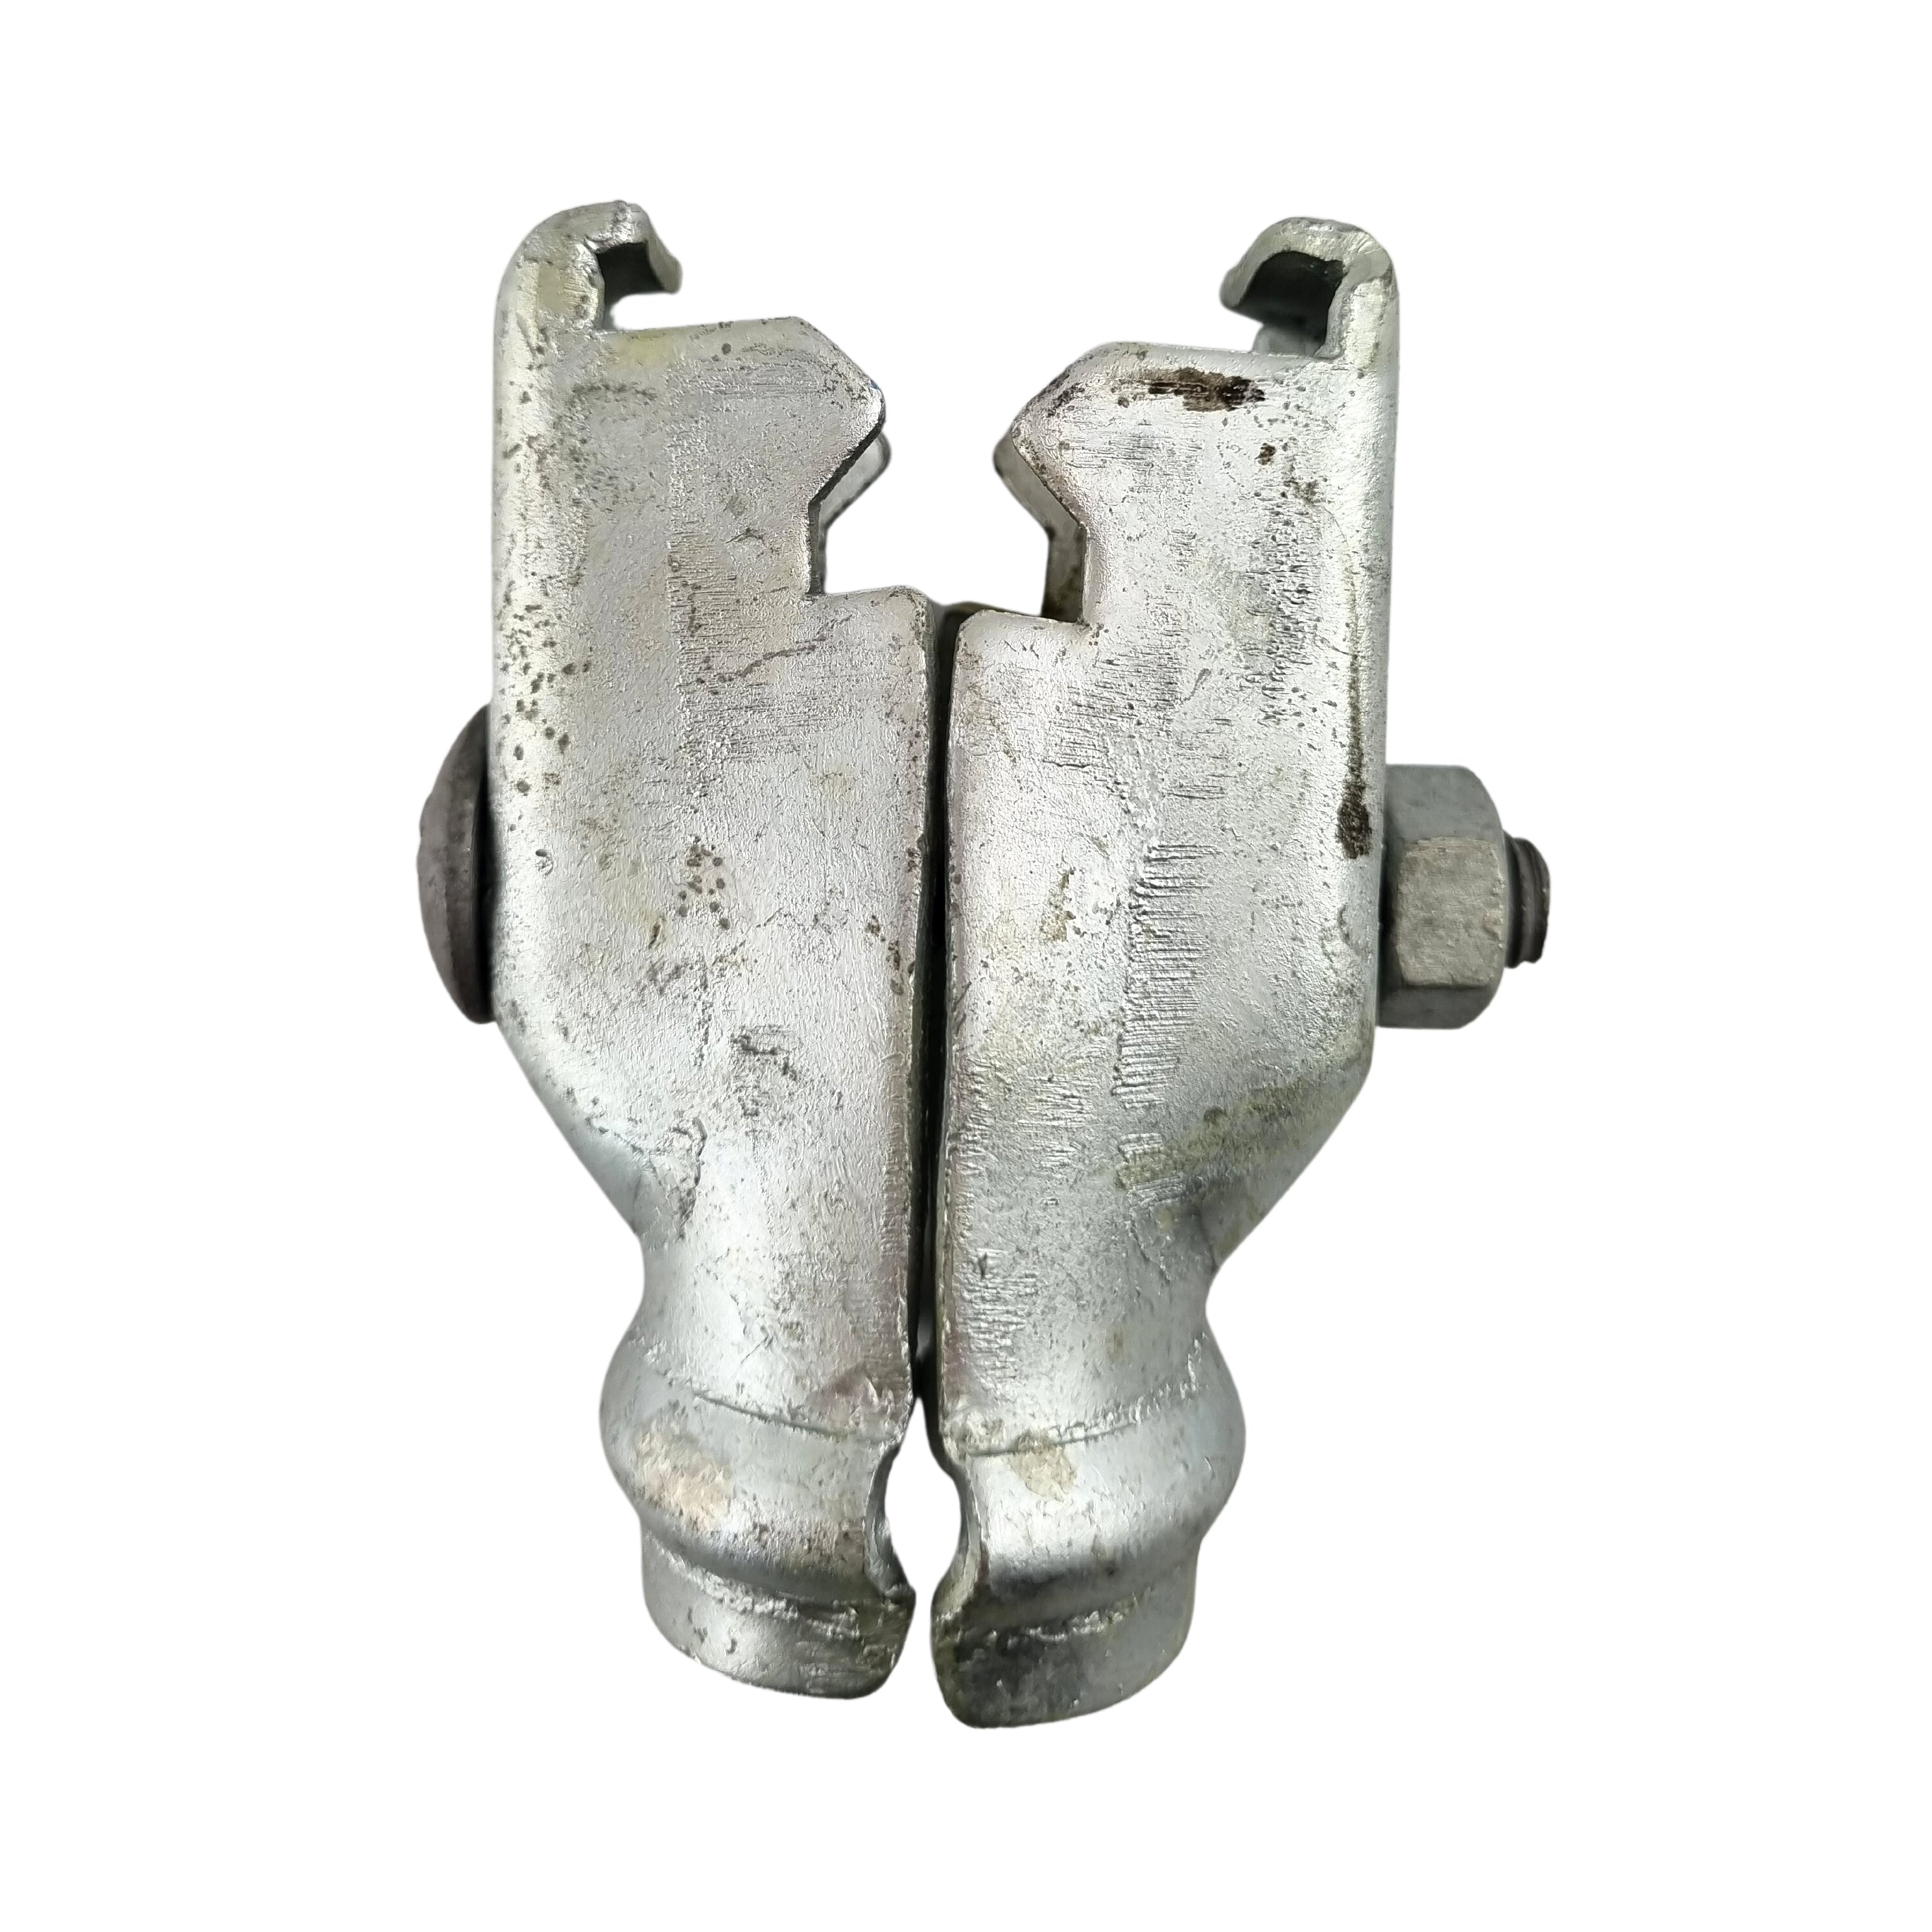 Universal Rail Clamps in a galvanised finish, Australian made. Code: UFFB. Australia wide shipping + Melbourne pick-up. Shop: Chain.com.au